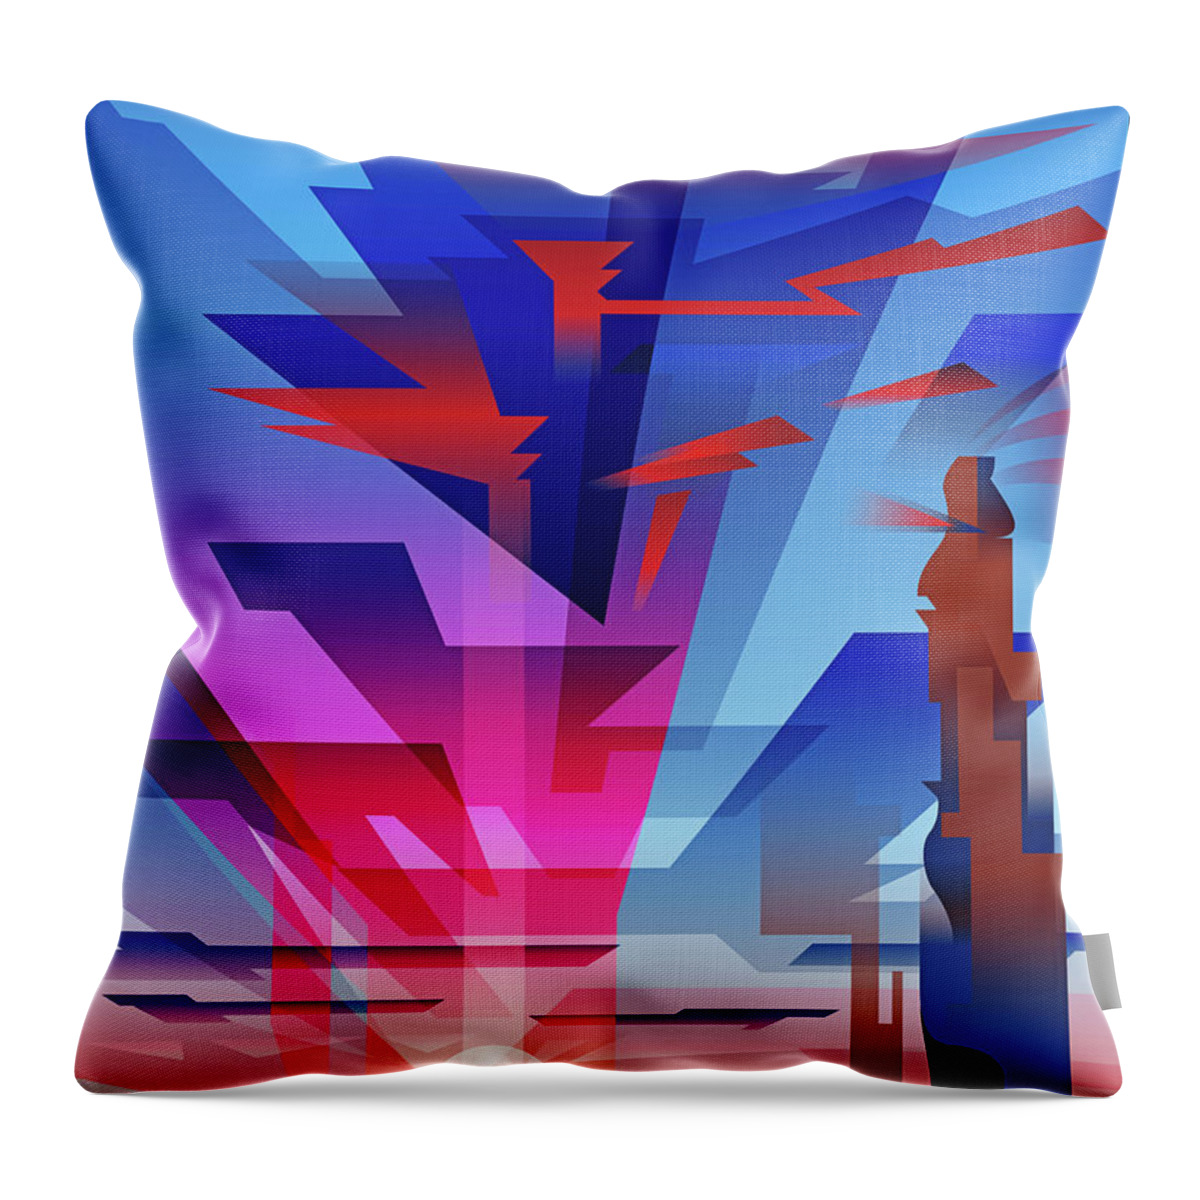 Four Corners Area Throw Pillow featuring the digital art Navajo Sunset by Garth Glazier